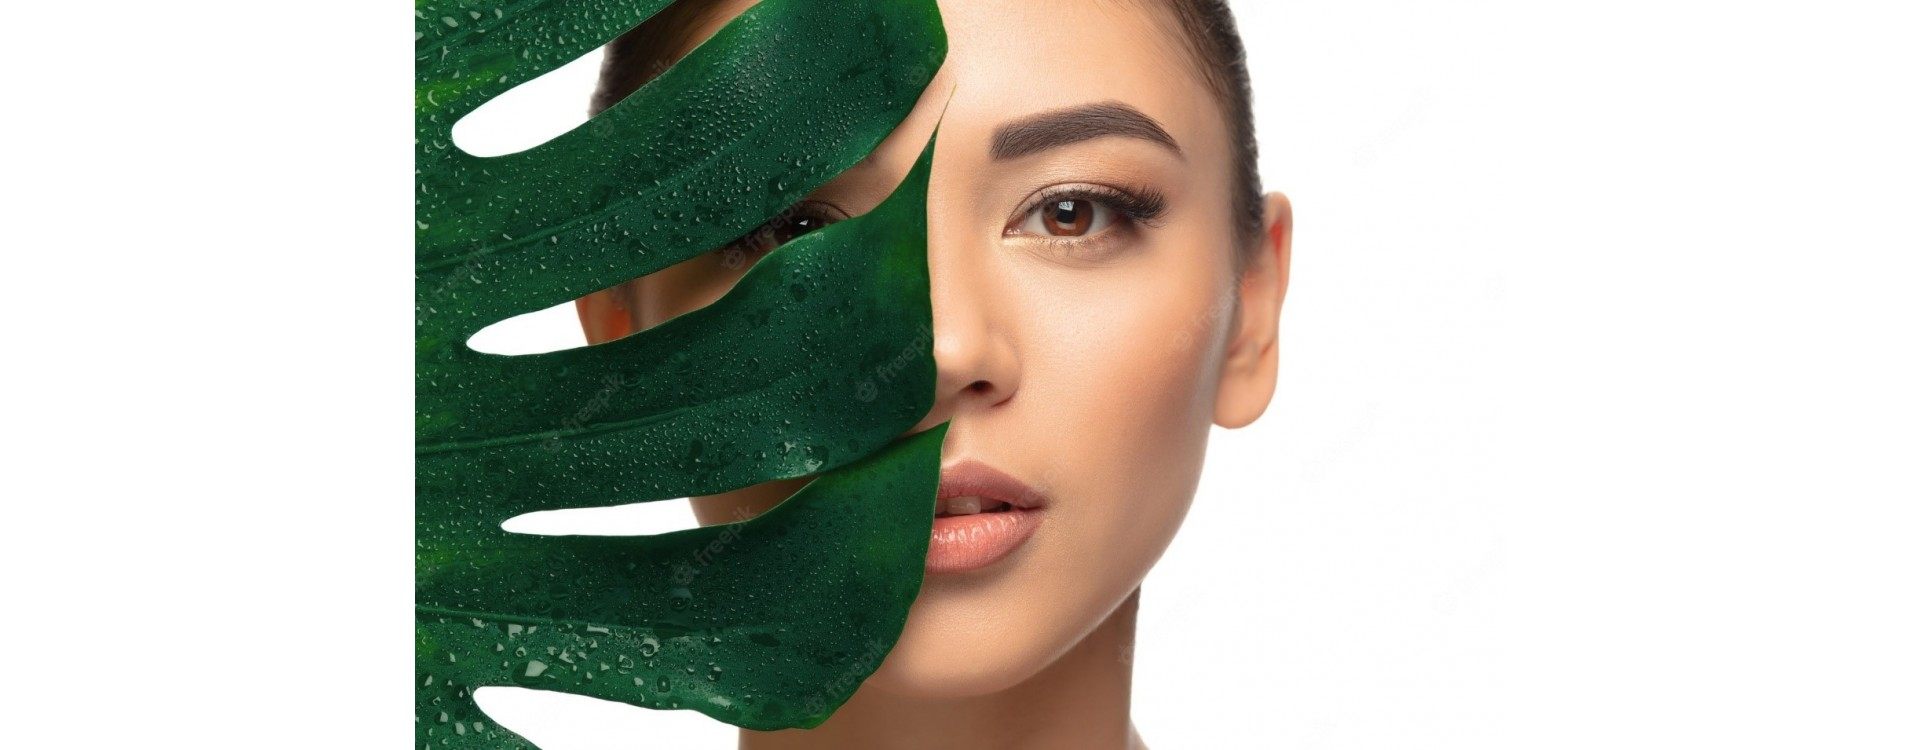 Glowing skin with organic products: guide to the benefits of natural beauty